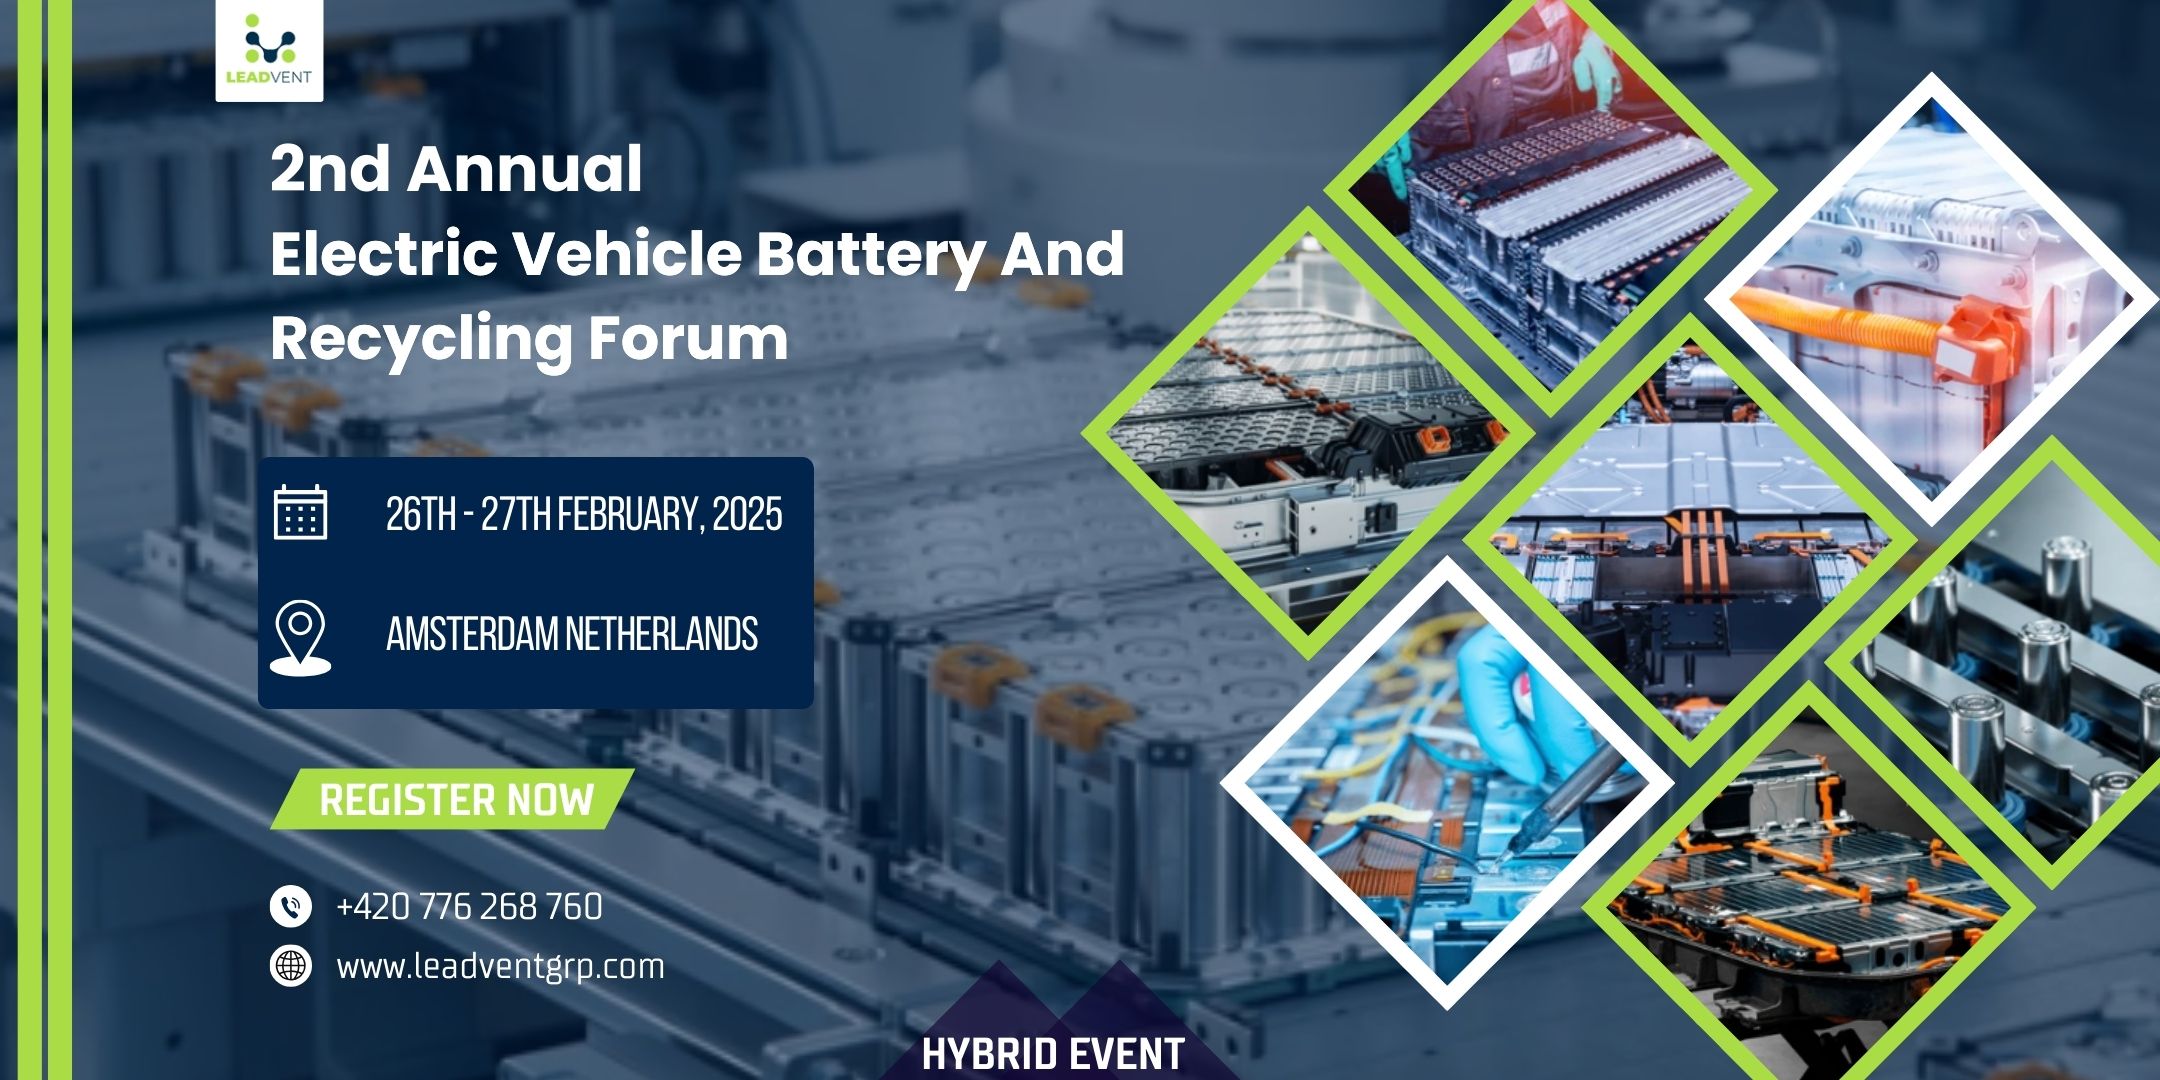 2nd Annual Electric Vehicle Battery Recycling Forum organized by Leadvent Group